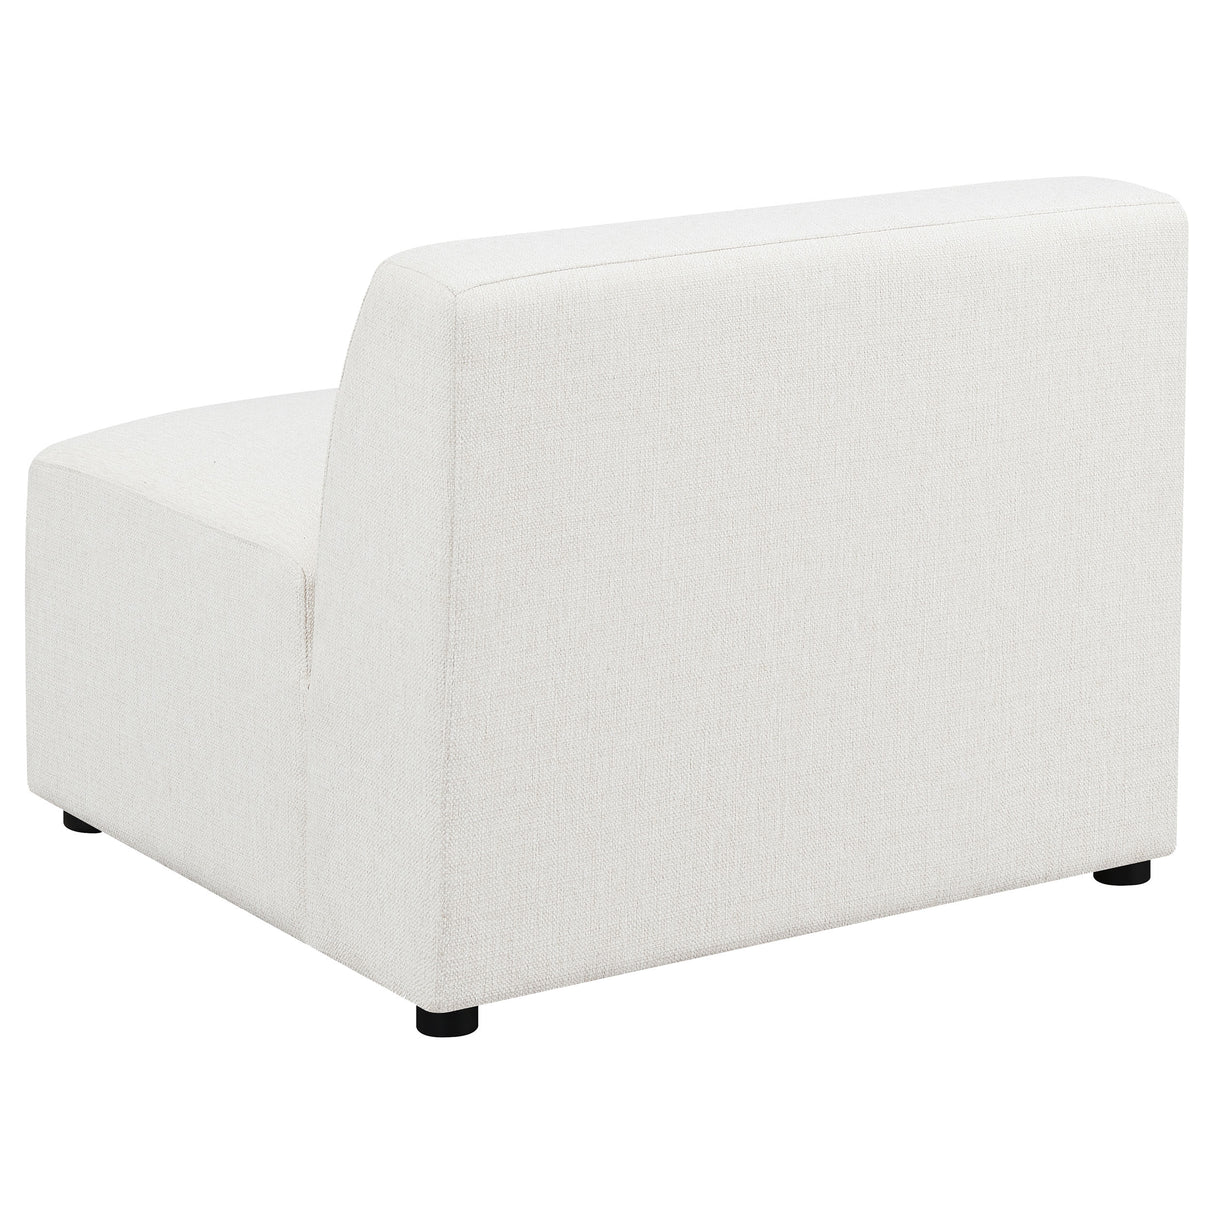 Armless Chair - Freddie Upholstered Tight Back Armless Chair Pearl